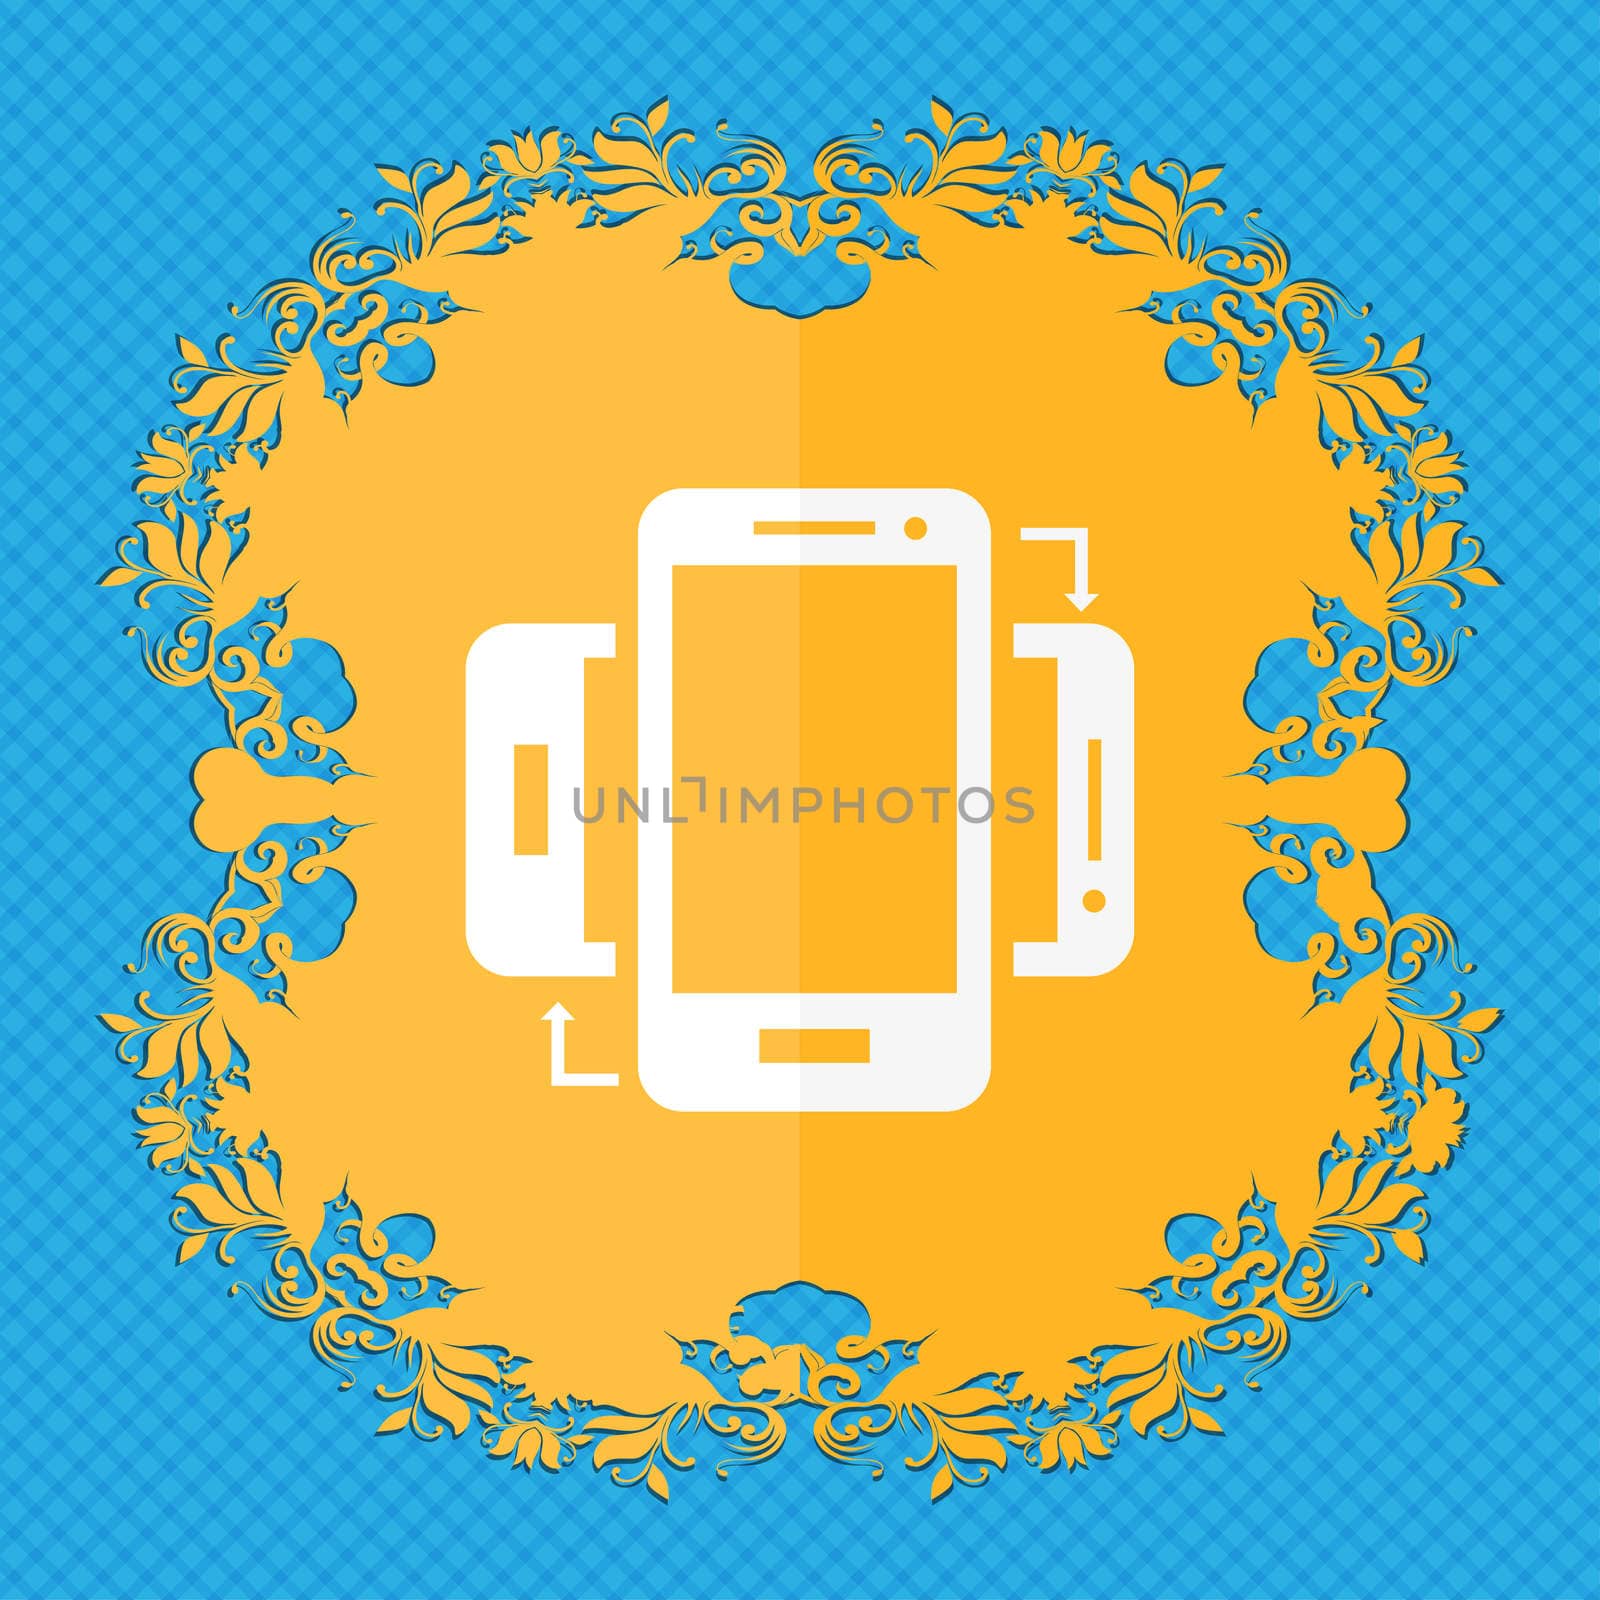 Synchronization sign icon. smartphones sync symbol. Data exchange. Floral flat design on a blue abstract background with place for your text. illustration